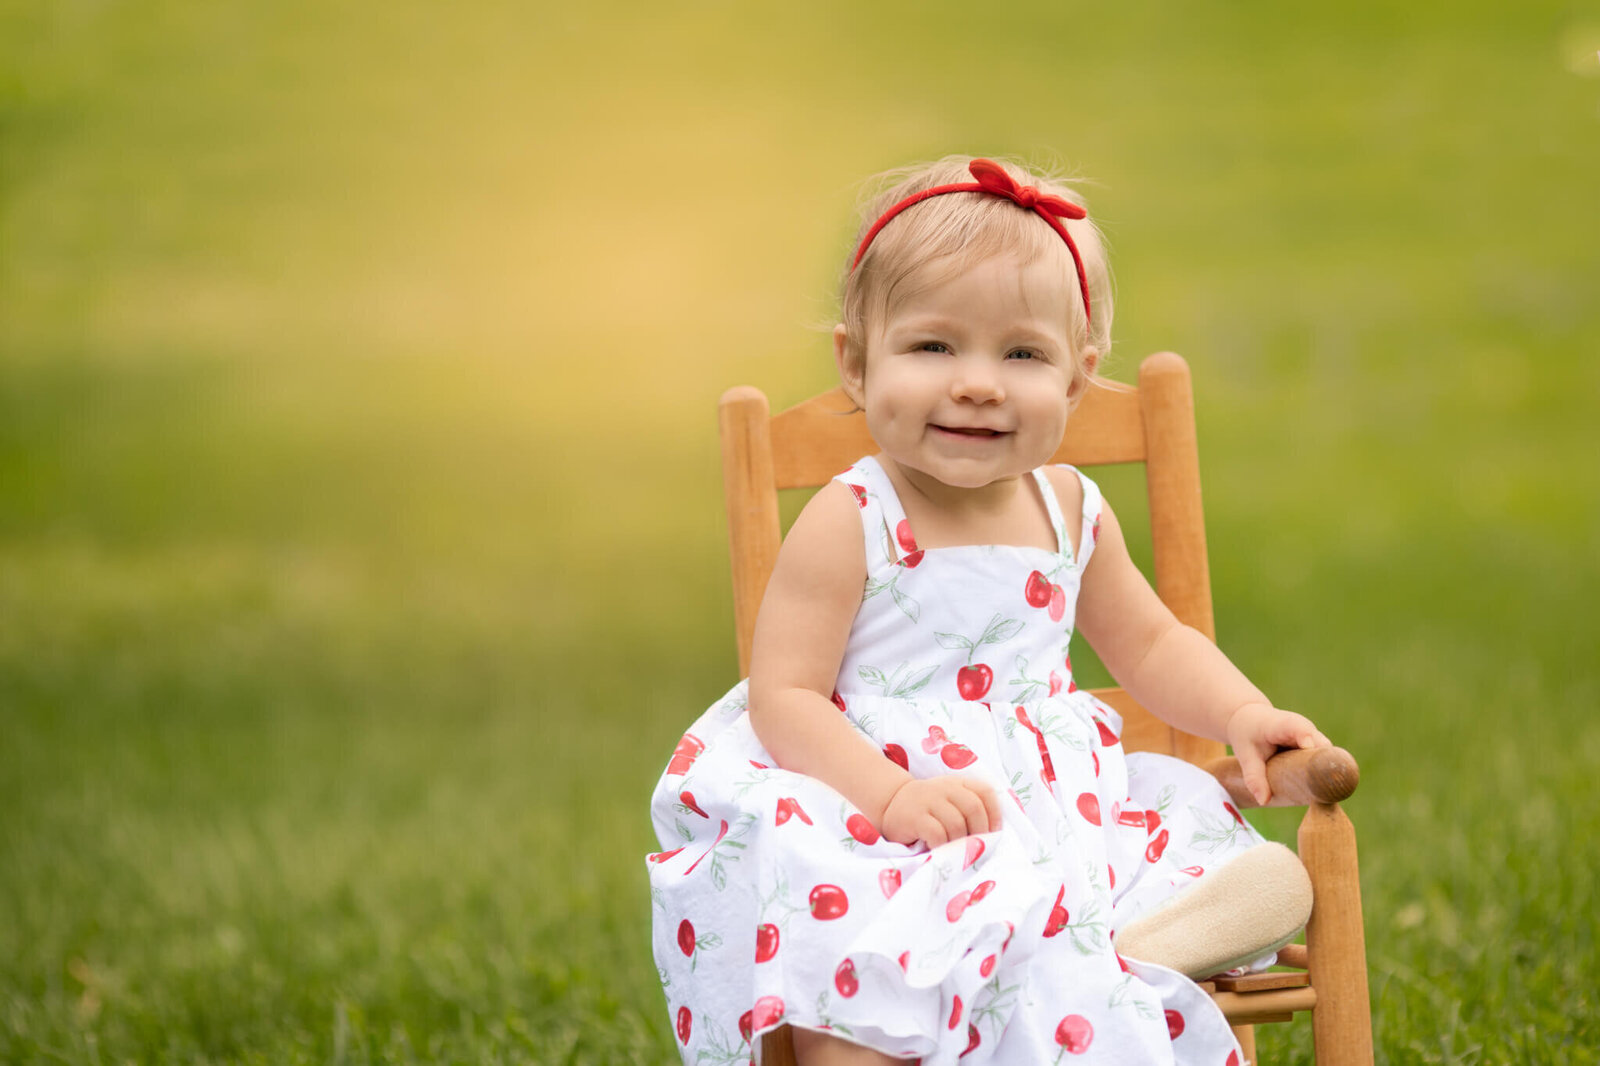 e year old girl wearing white dress with red cherries and a red hair bow sitting in a chair outdoors